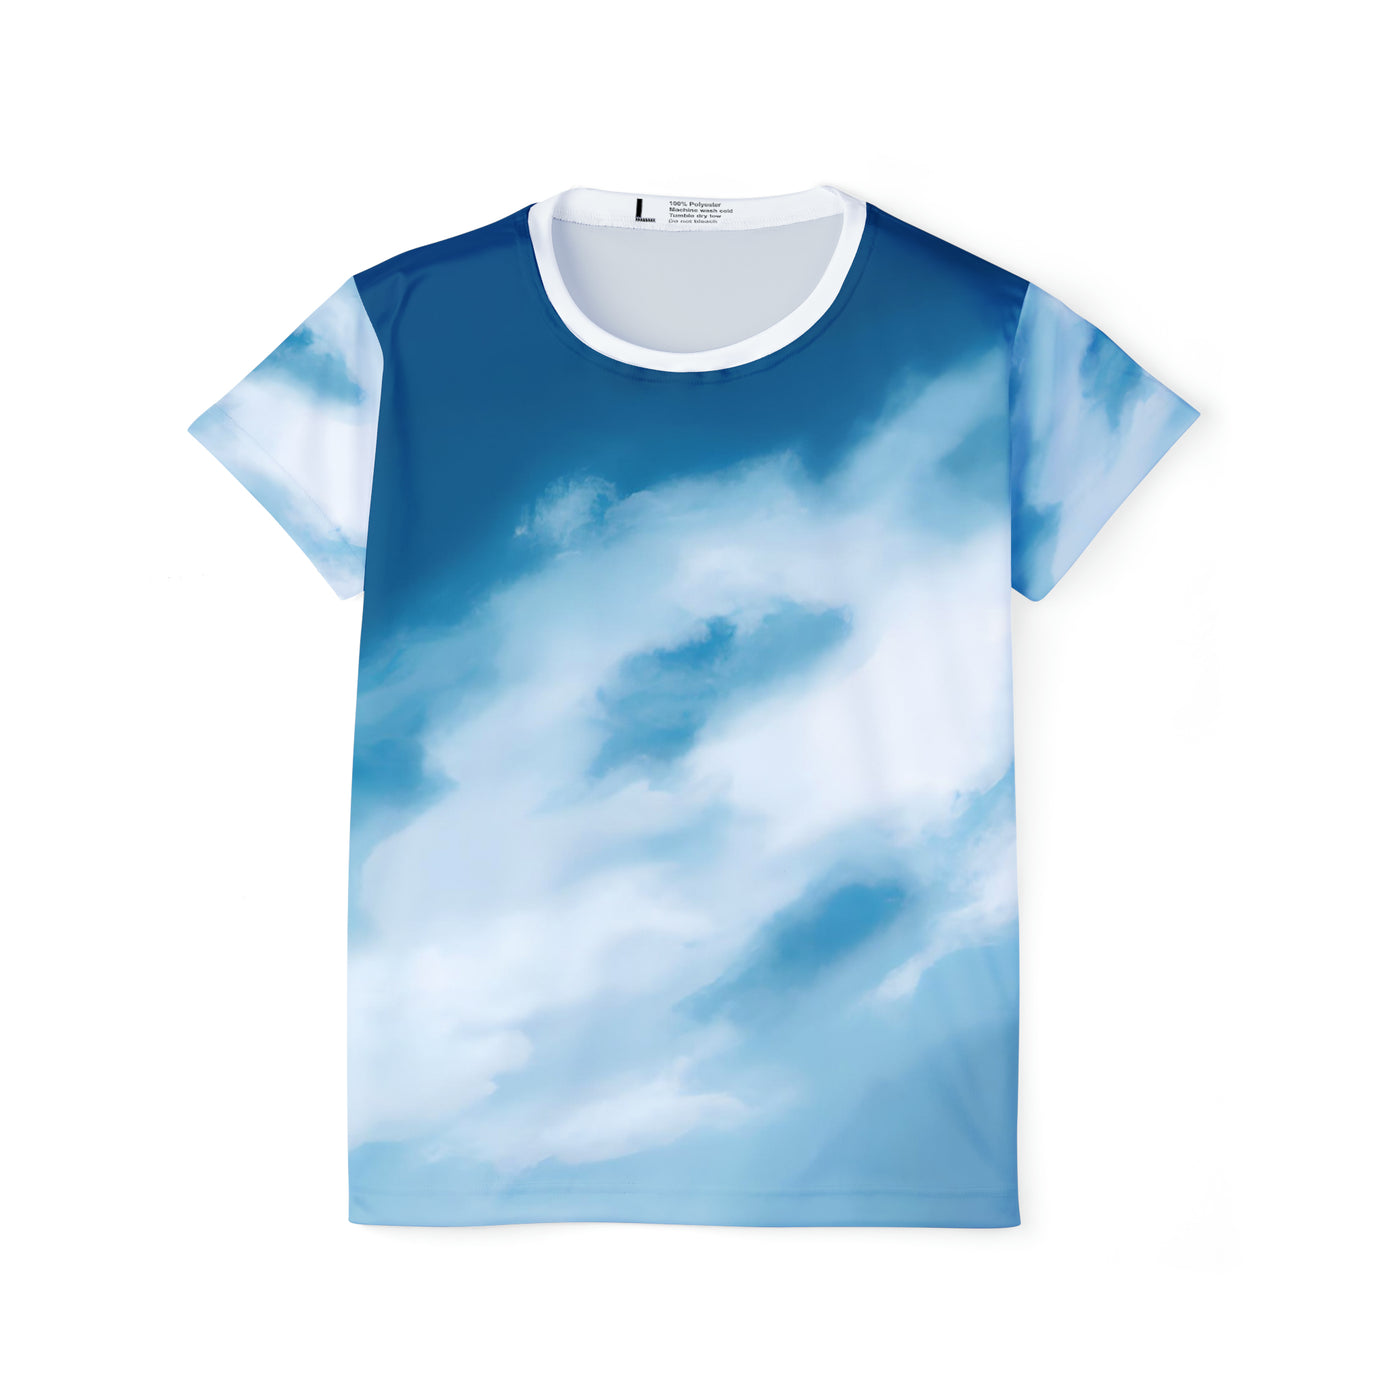 "Amazingly Awesome, Cloudy Skies!" Women's Sports Jersey